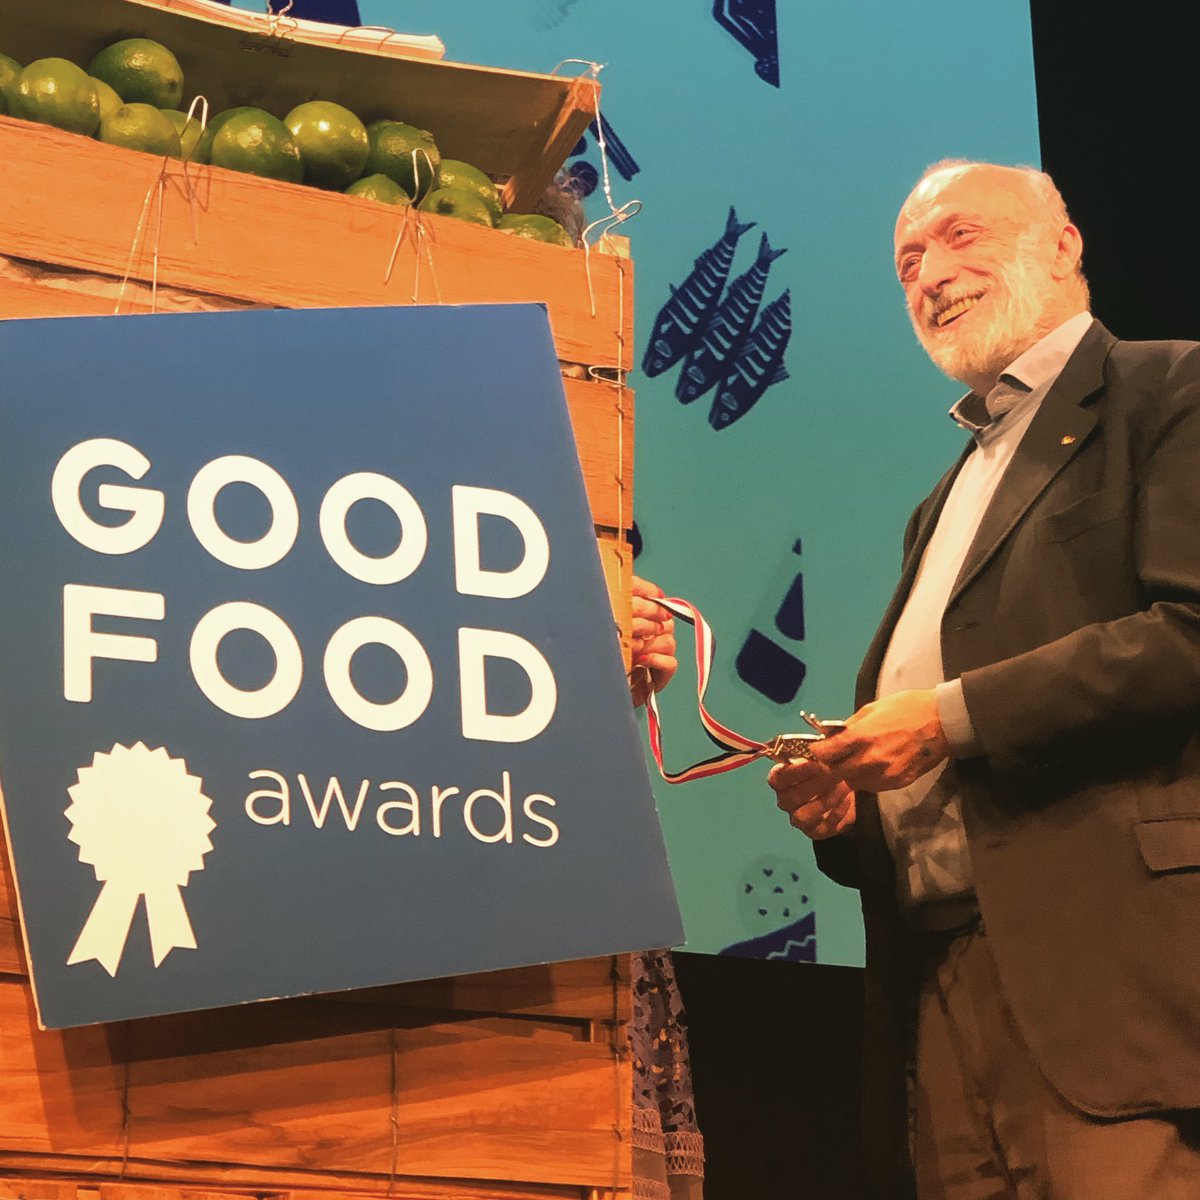 The first Ever Honorary Good Food Award goes to the “Pope of the Good Food Church” himself, Carlo Petrini #GoodCleanFair